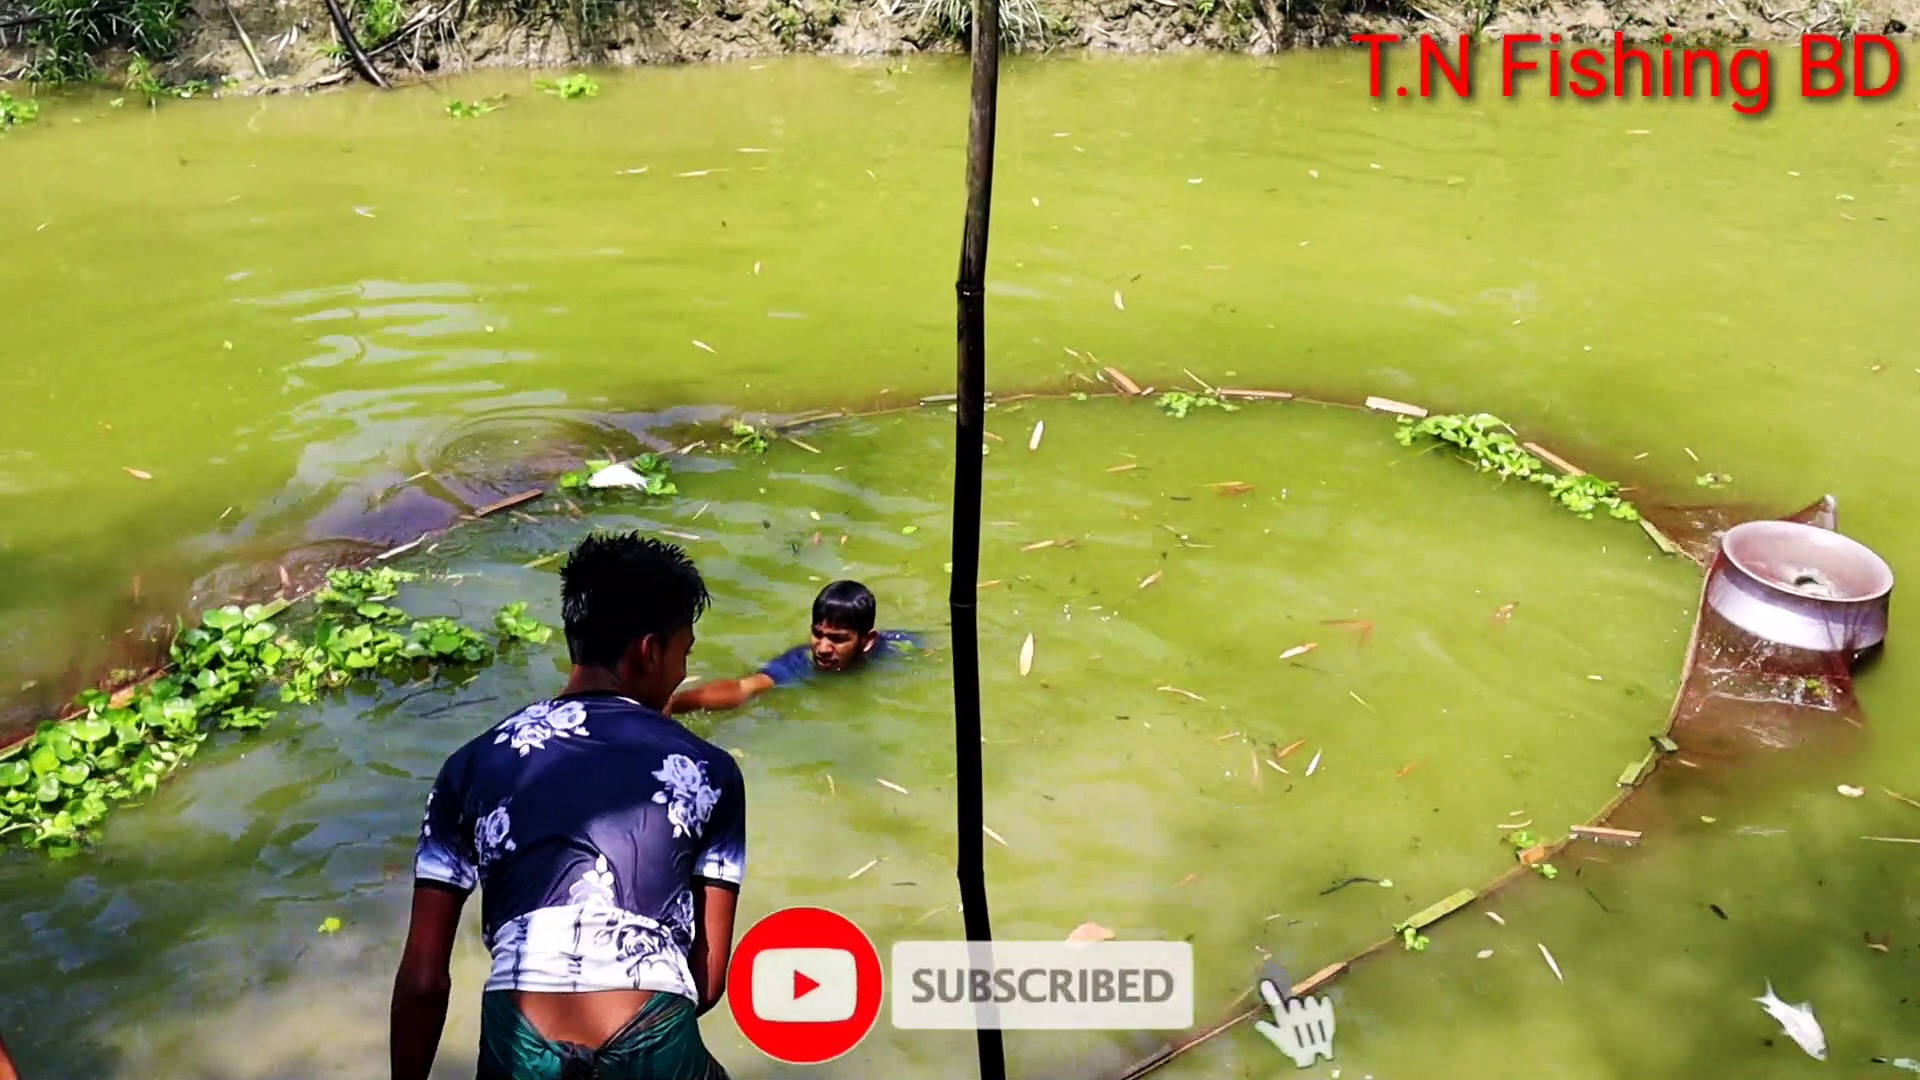 Net Fishing  Fish Catching Using By Net in The Village Beautiful Water Pond  T.N Fishing BD